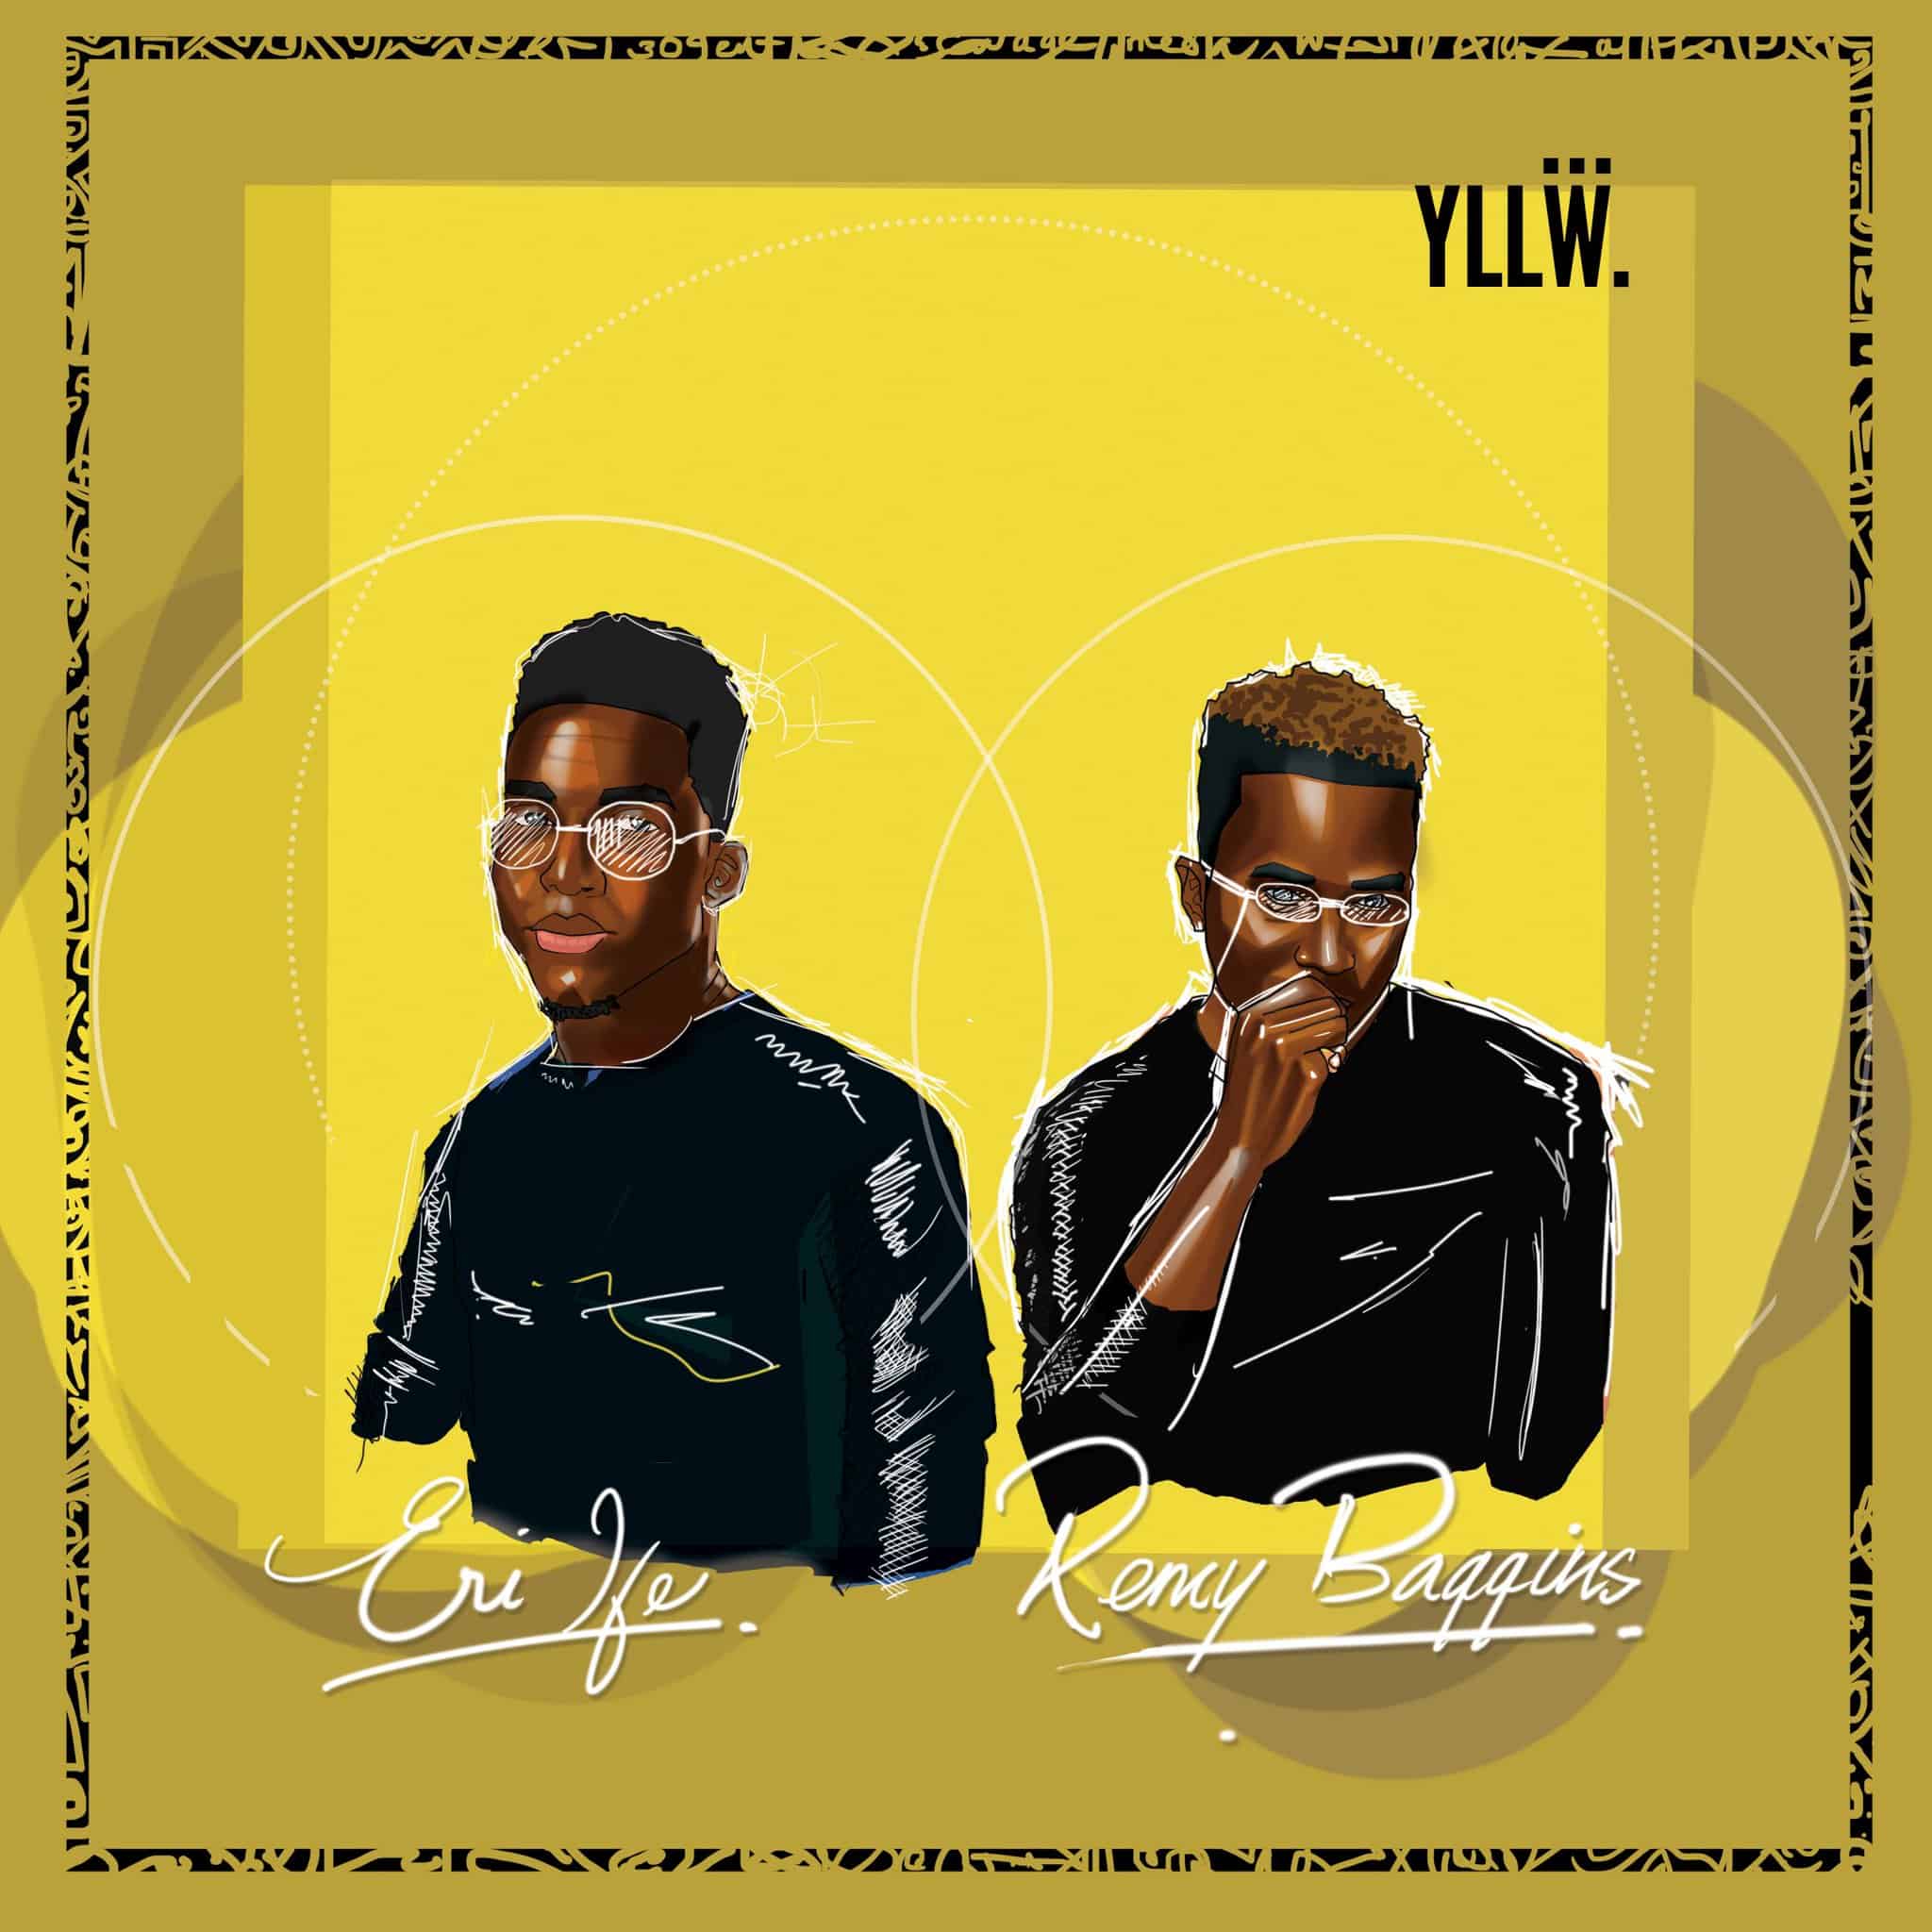 Remi Baggins and Eri Ife release collaborative EP, ‘YLLW’